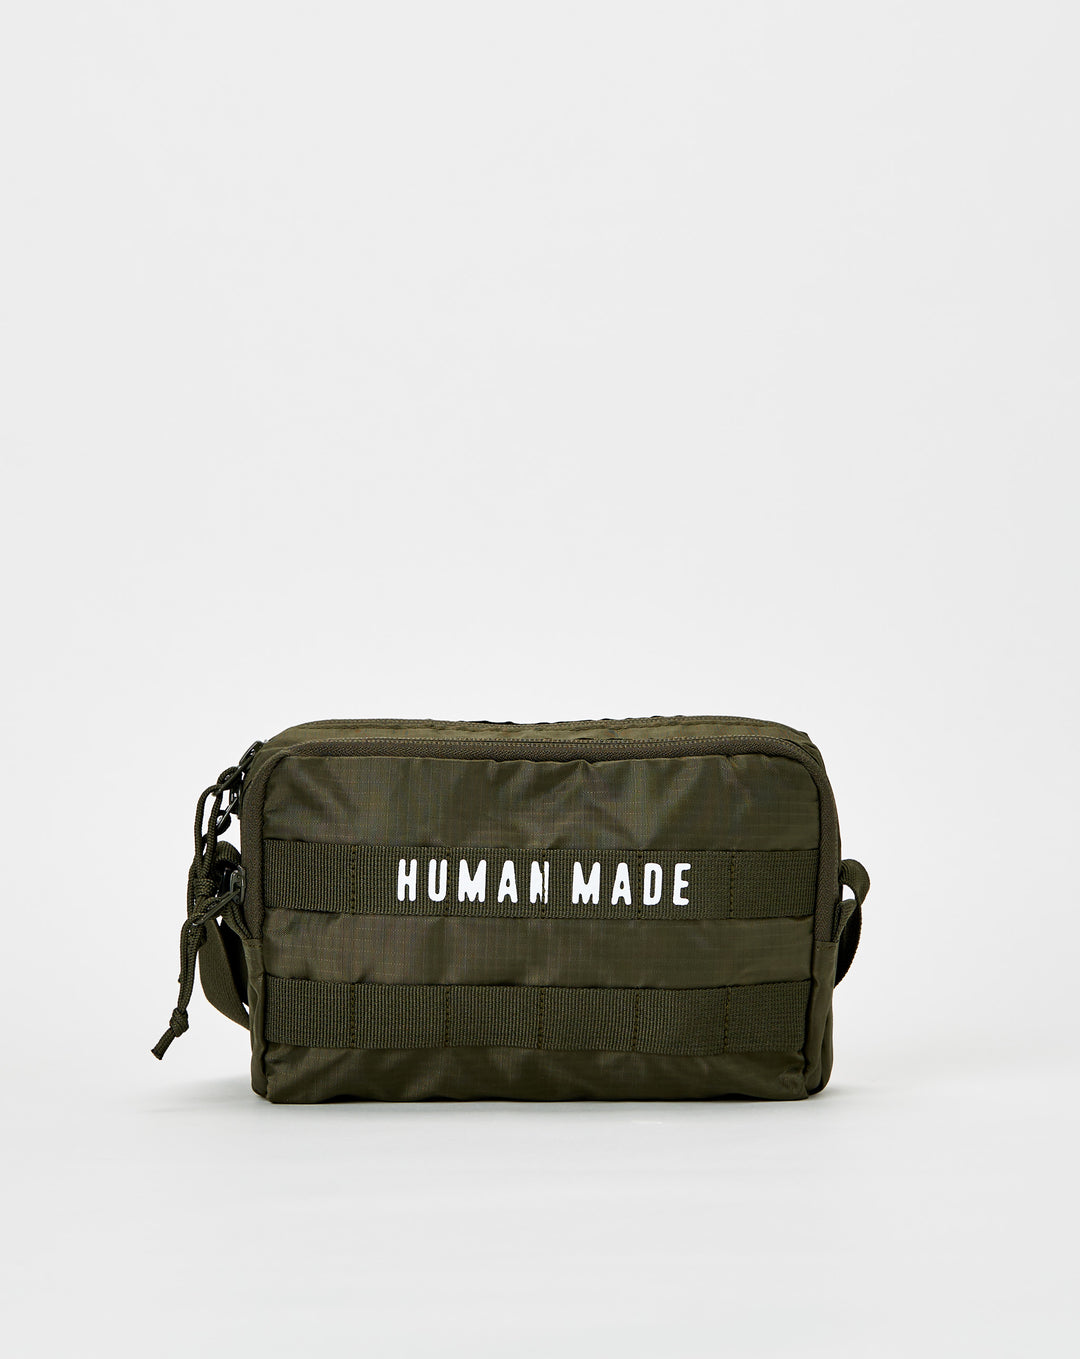 Human Made Olive Drab / O/S  - Cheap Cerbe Jordan outlet